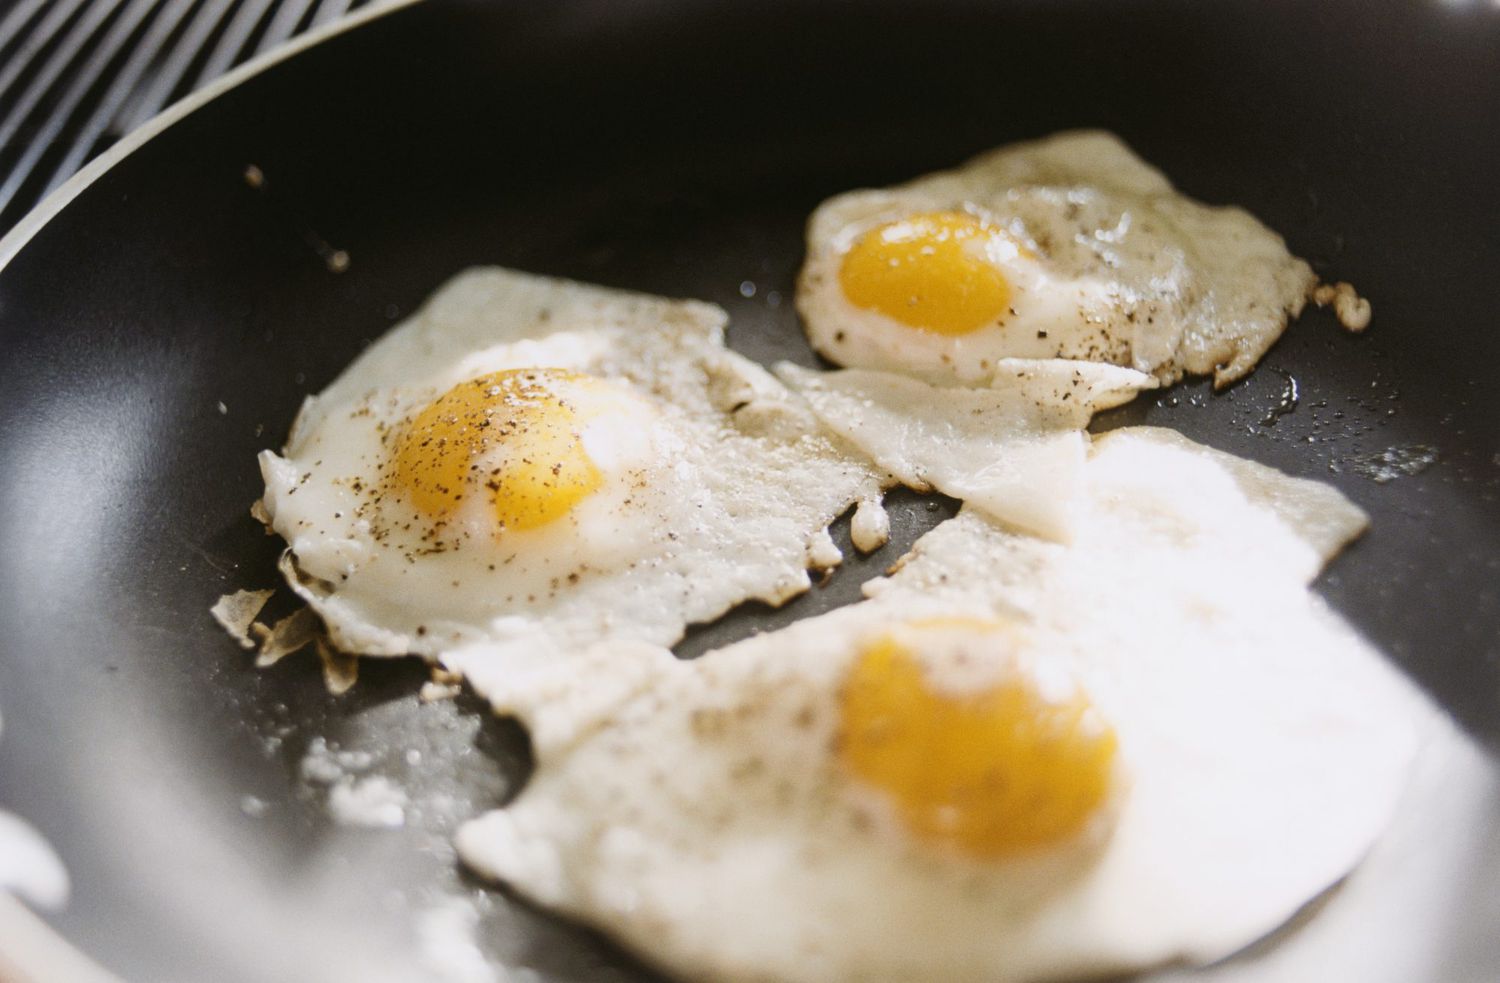 Eating One Egg Each Day Could Decrease Your Risk of Heart Disease, New Study Suggests